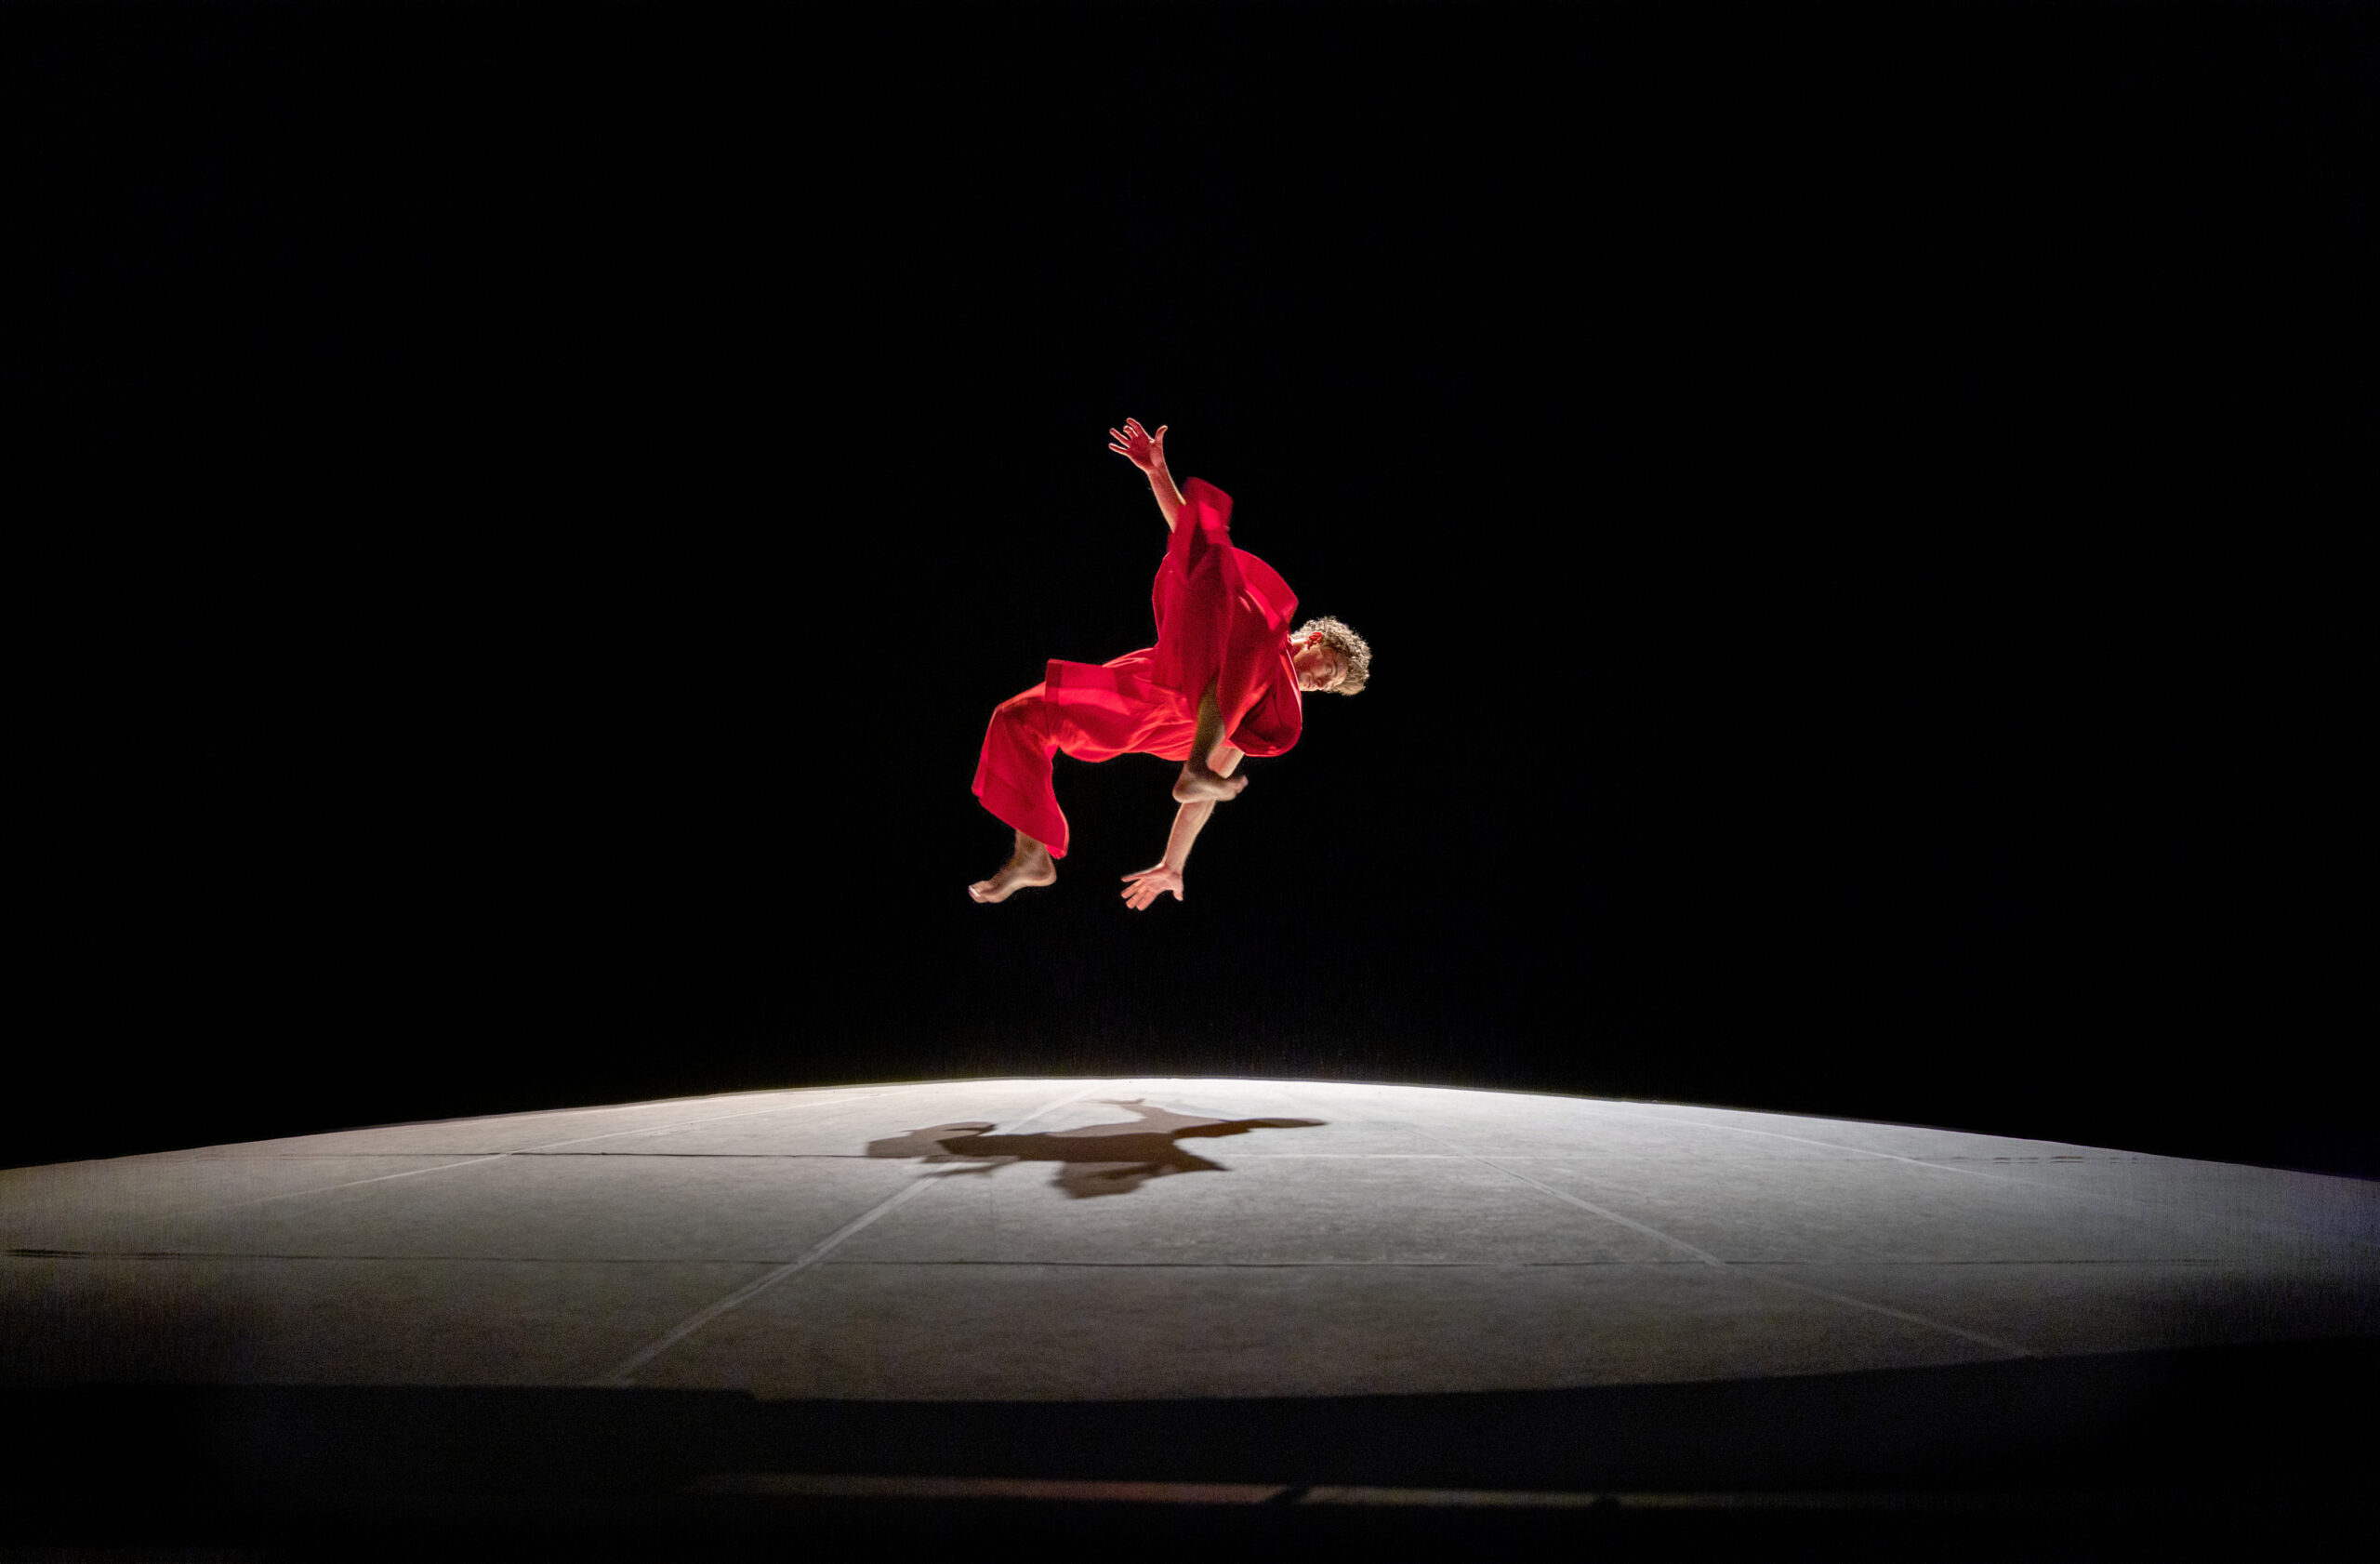 male dancer wearing red flowy costume flying through the air